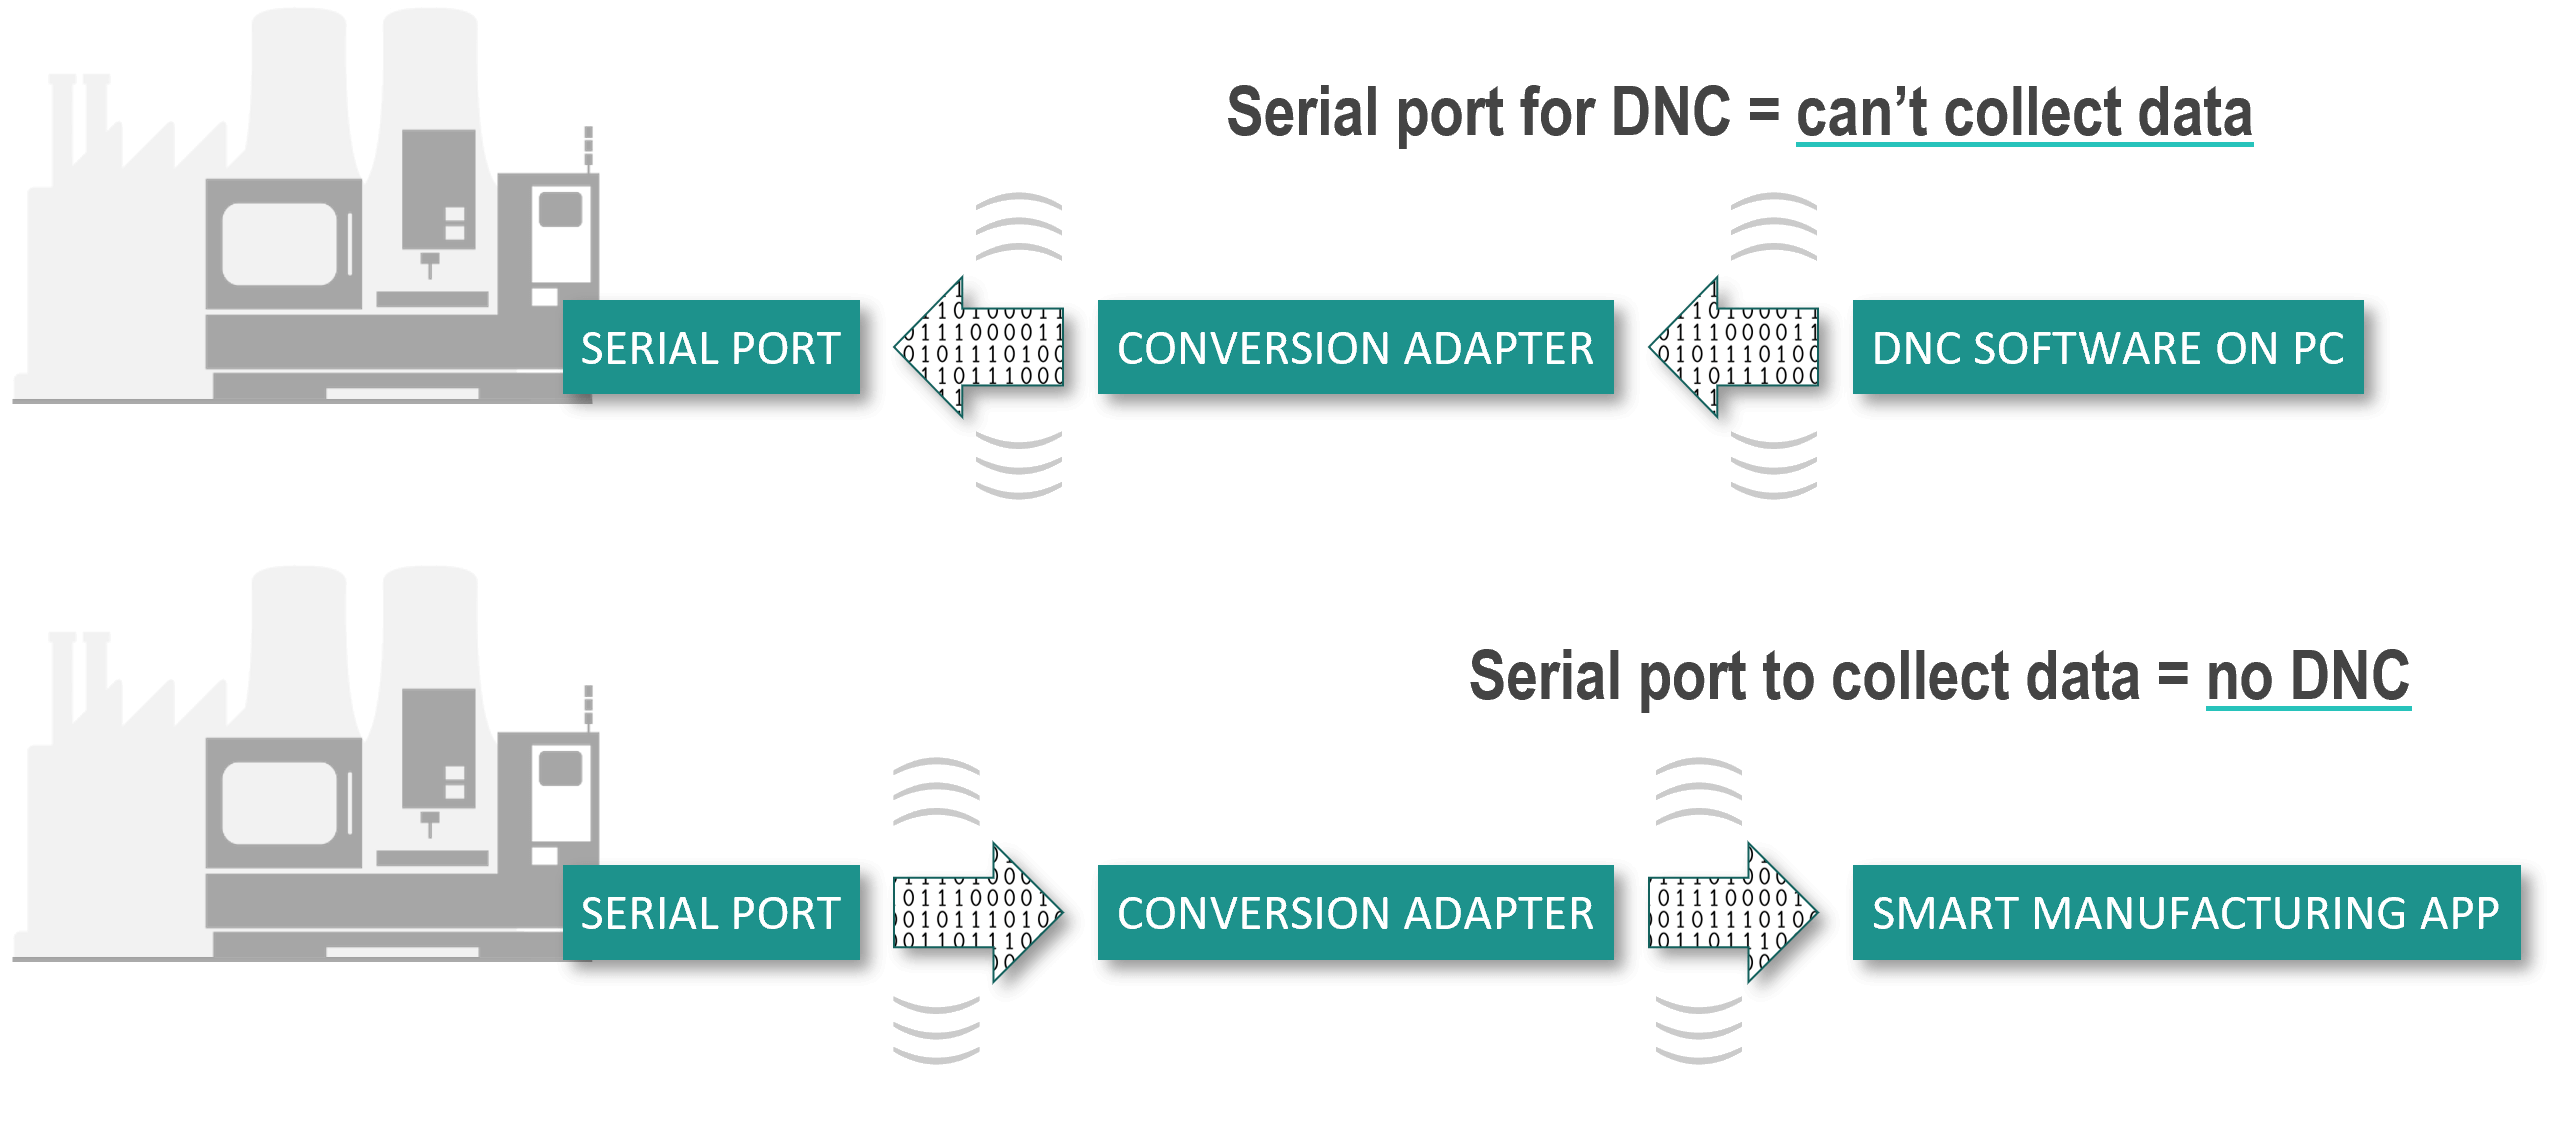 On a HAAS CNC machine, you can use serial port for DNC or to collect data for smart manufacturing